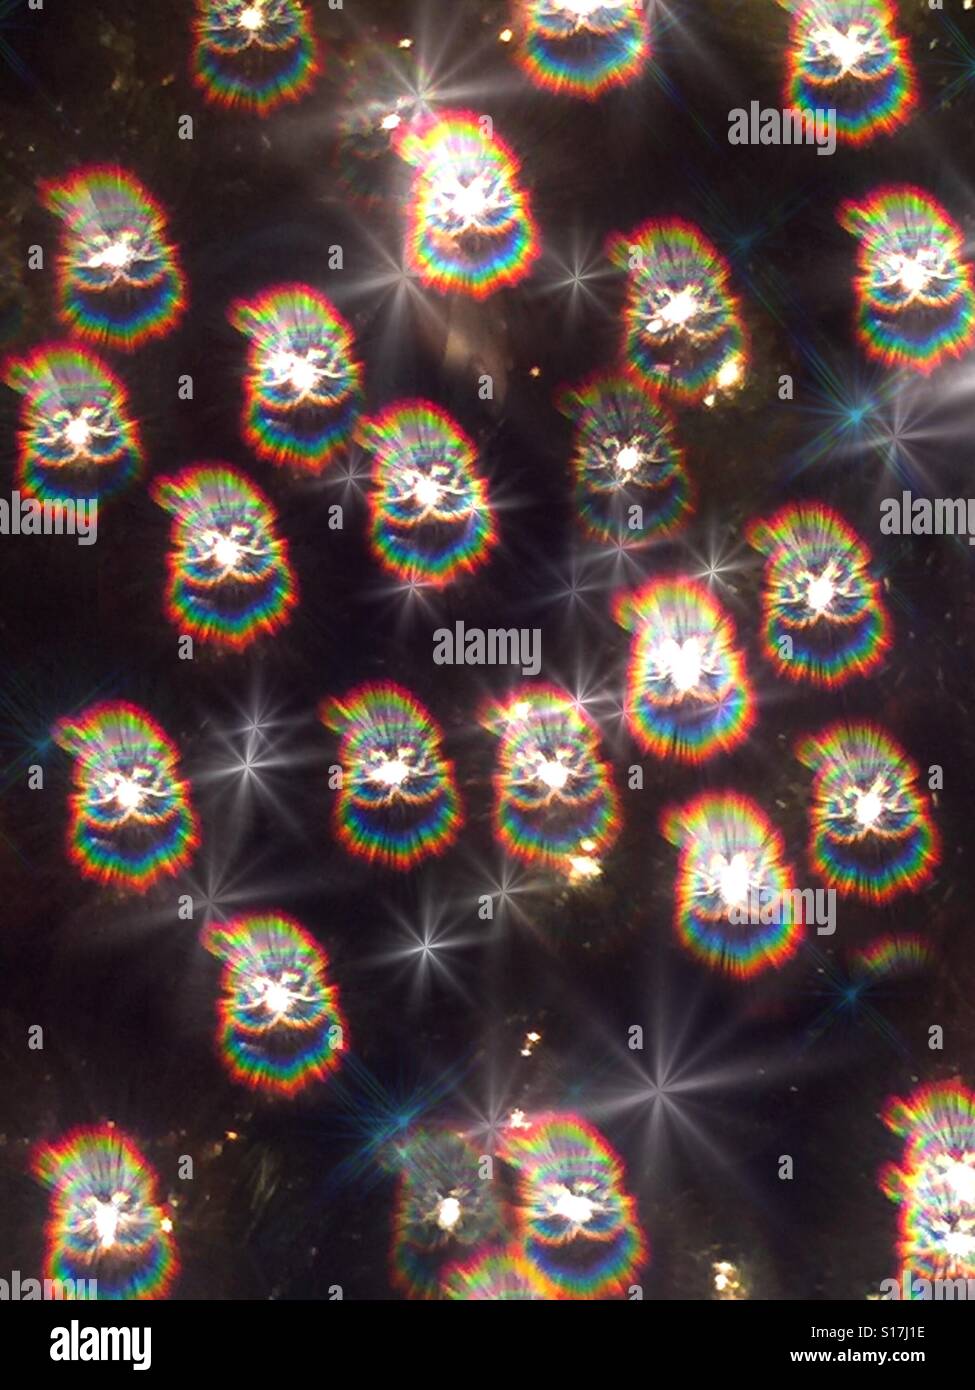 Bright holographic prismatic lights of Santa Claus heads on a Christmas tree Stock Photo